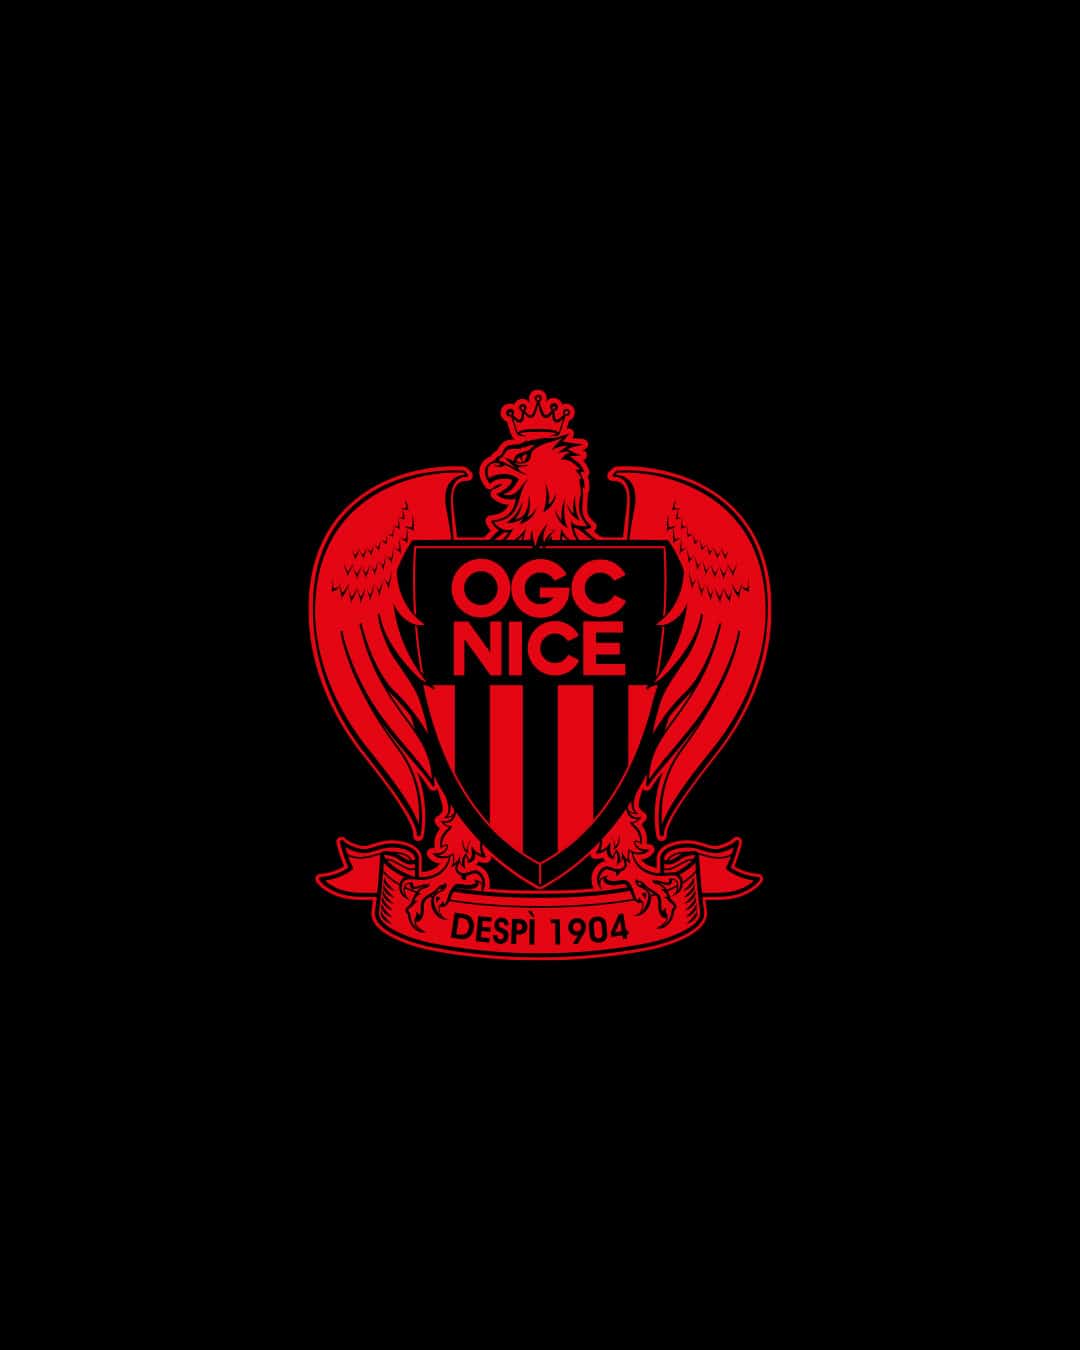 Isreal-Hamas conflict: OGC Nice suspend Algerian Youcef Atal over anti-semitic video controversy